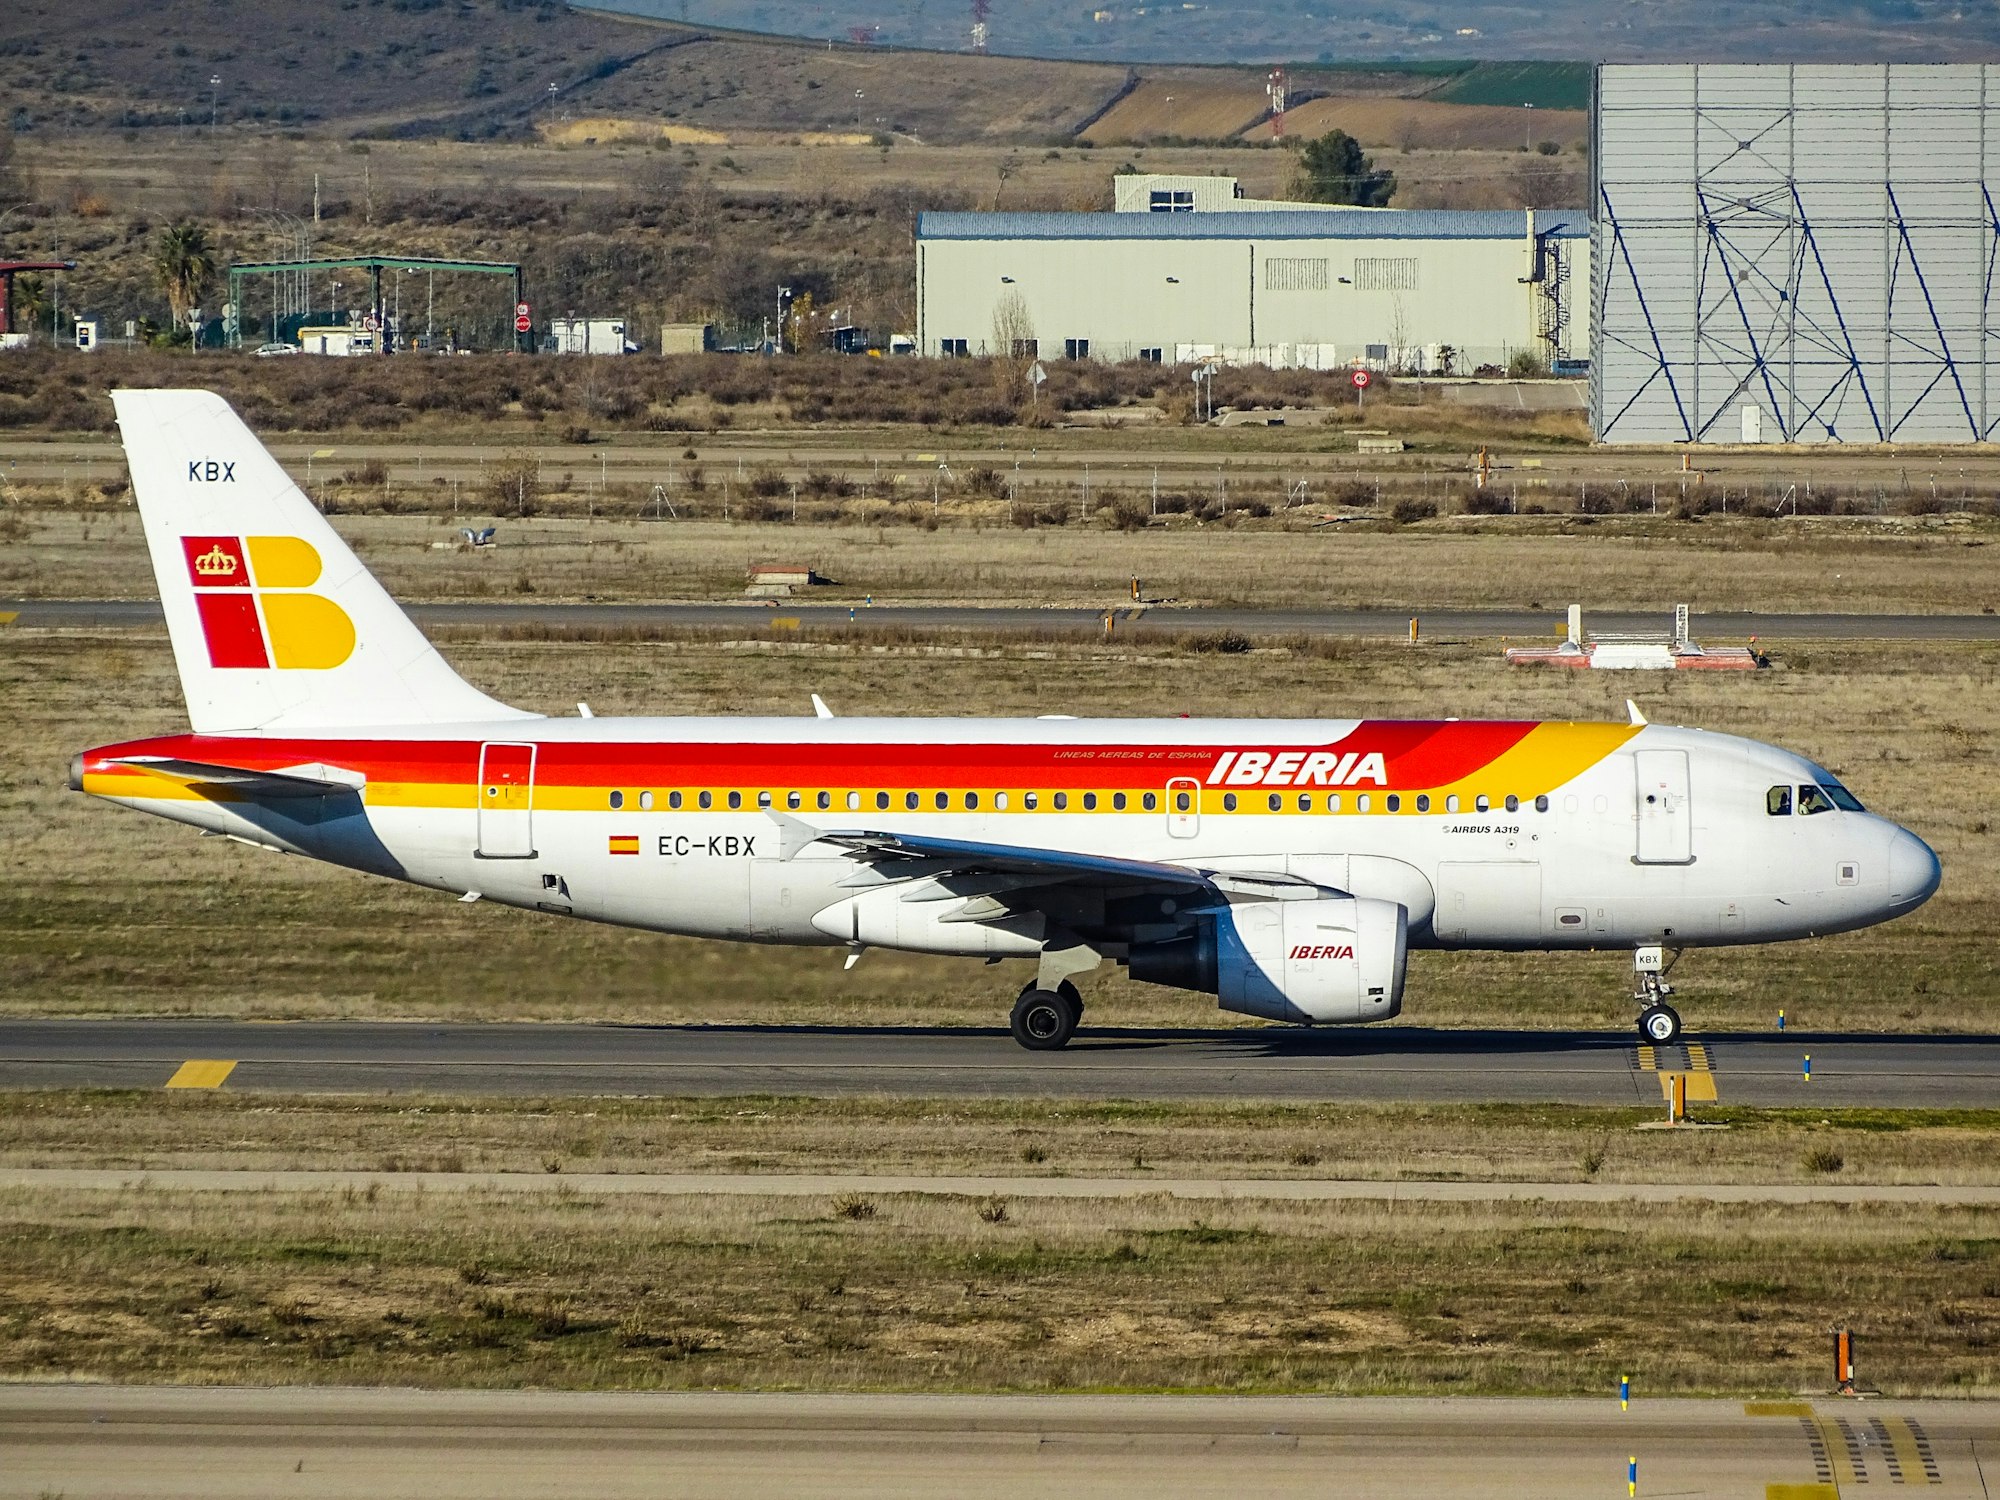 A Spanish Airline Ranks in the Top 5... But It's Not the One You Think